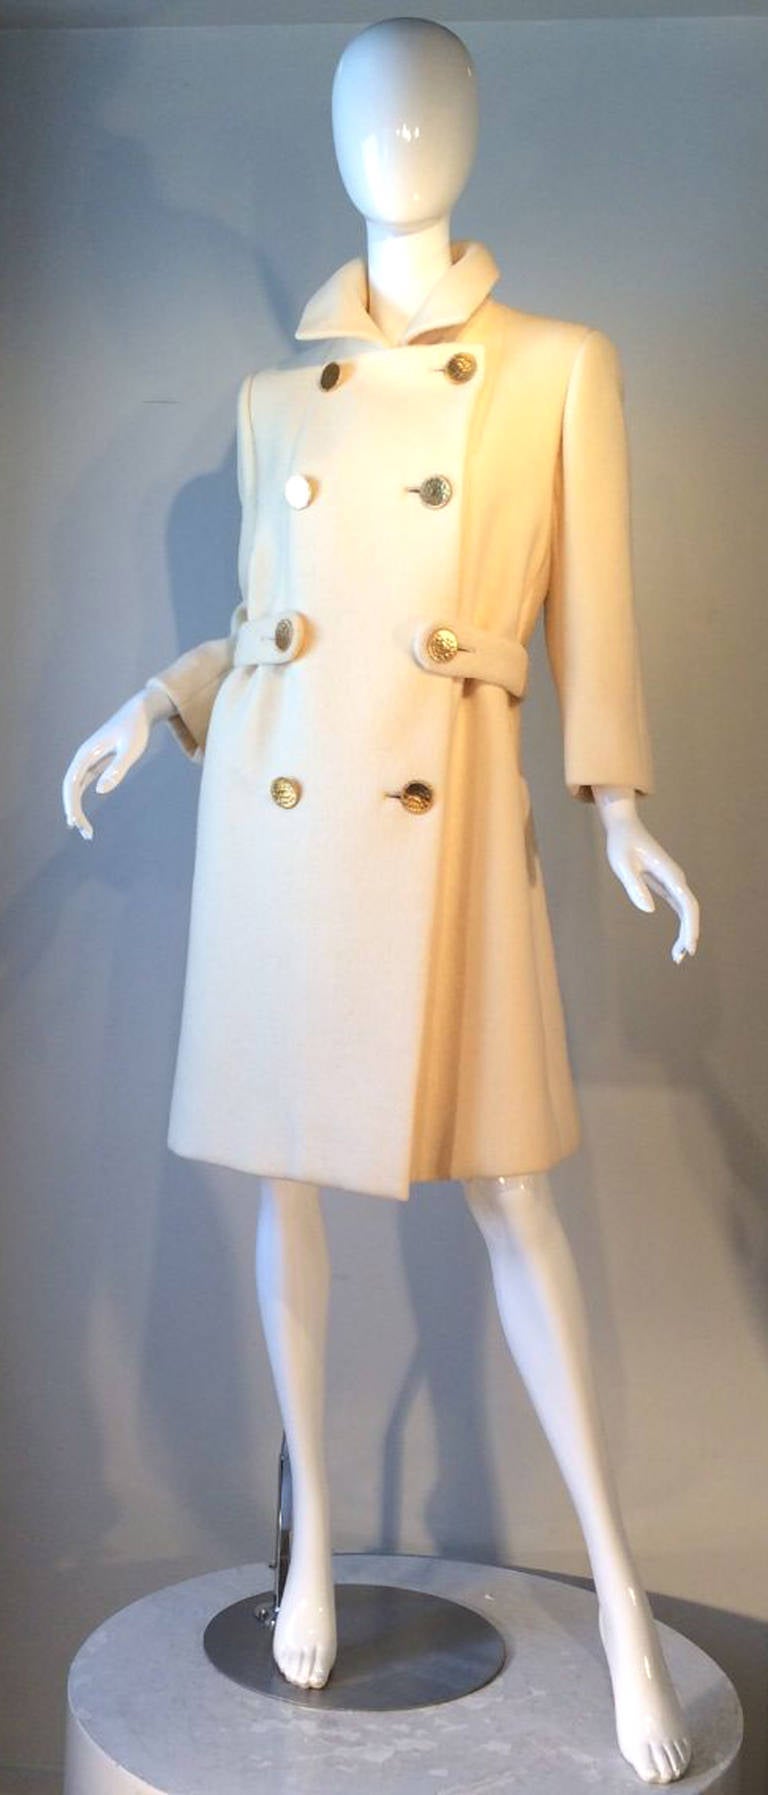 A fine Norman Norell coat. Fine ivory wool item features precision seams, double breasted front, half belt, large gilt metal buttons and fully silk lined. Pristine appears unworn.